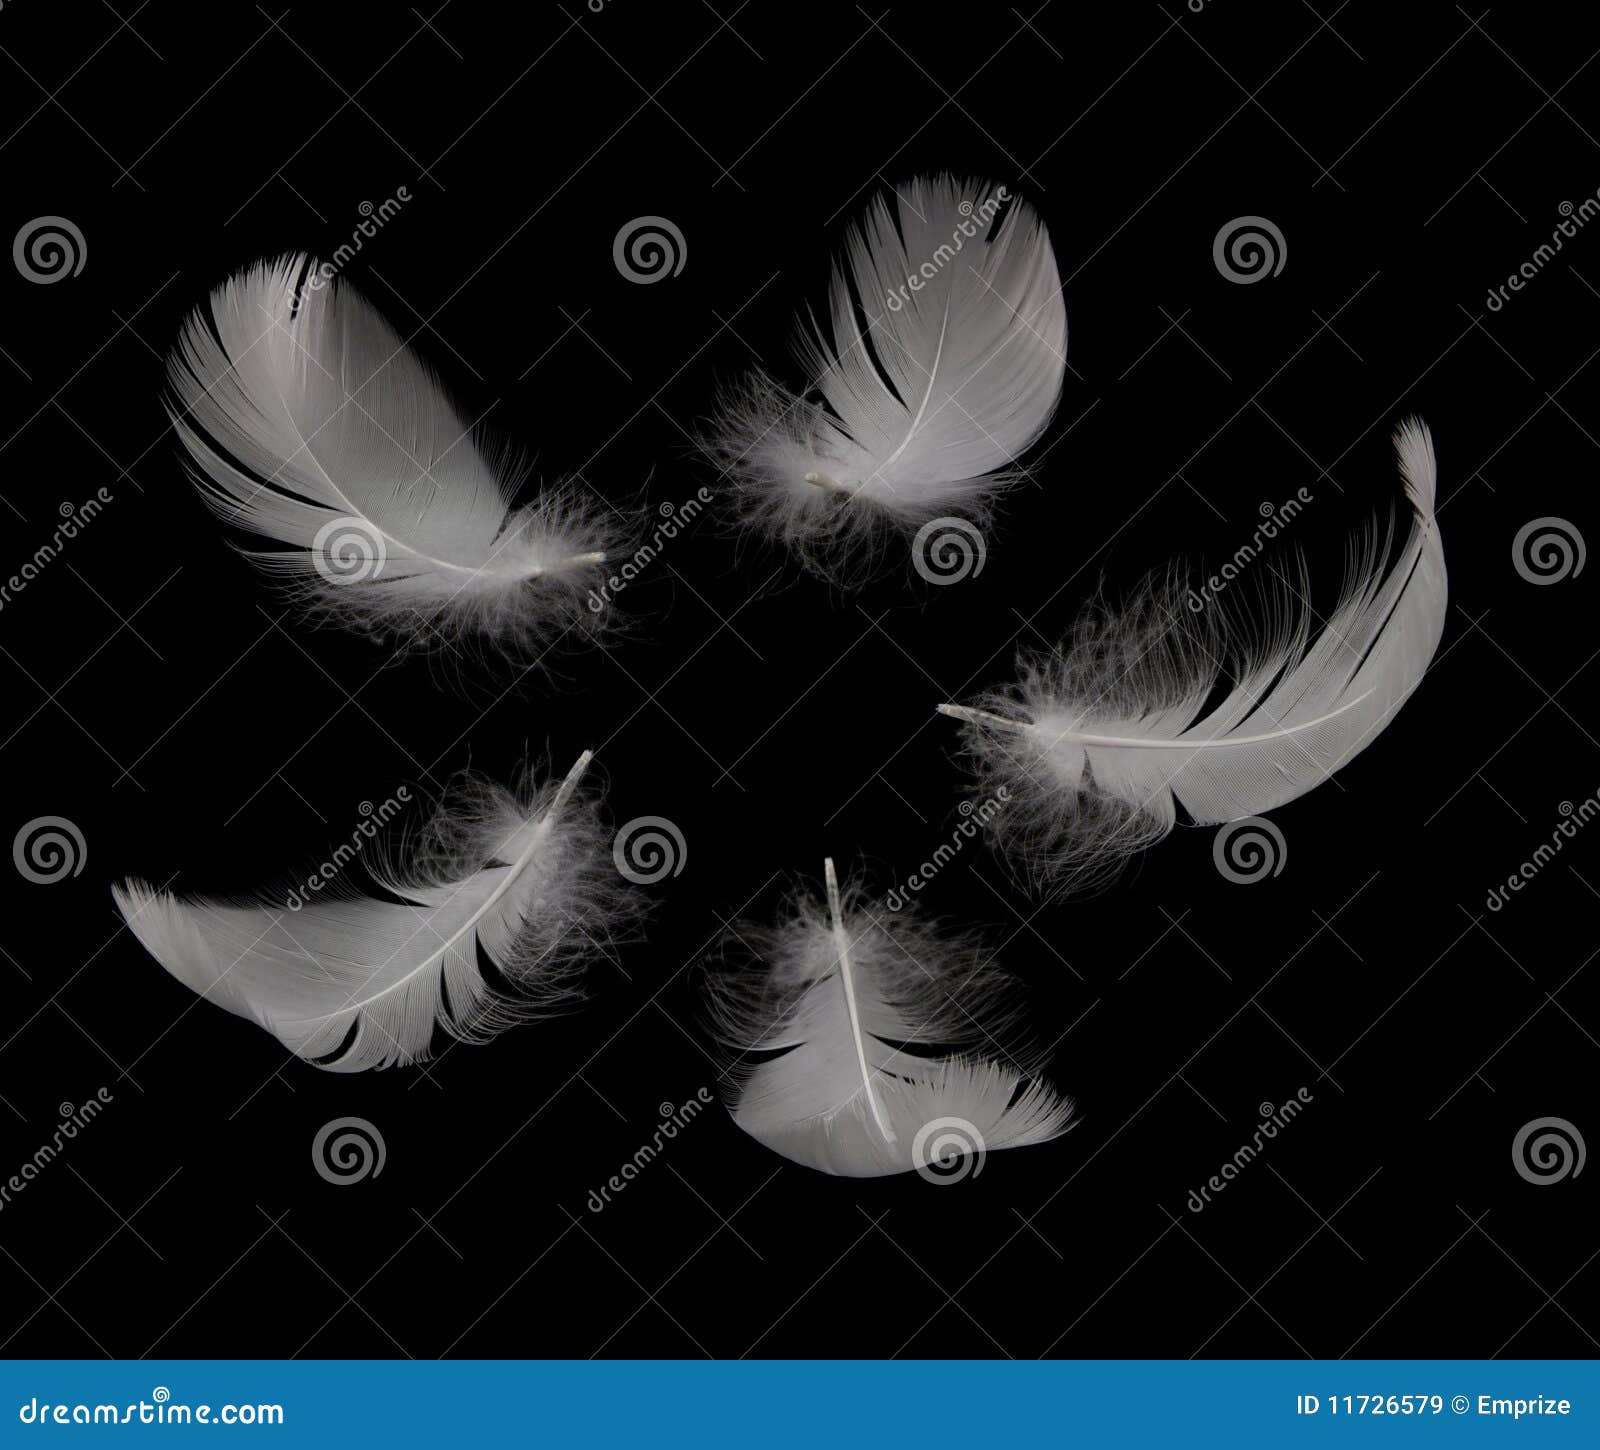 swan feathers